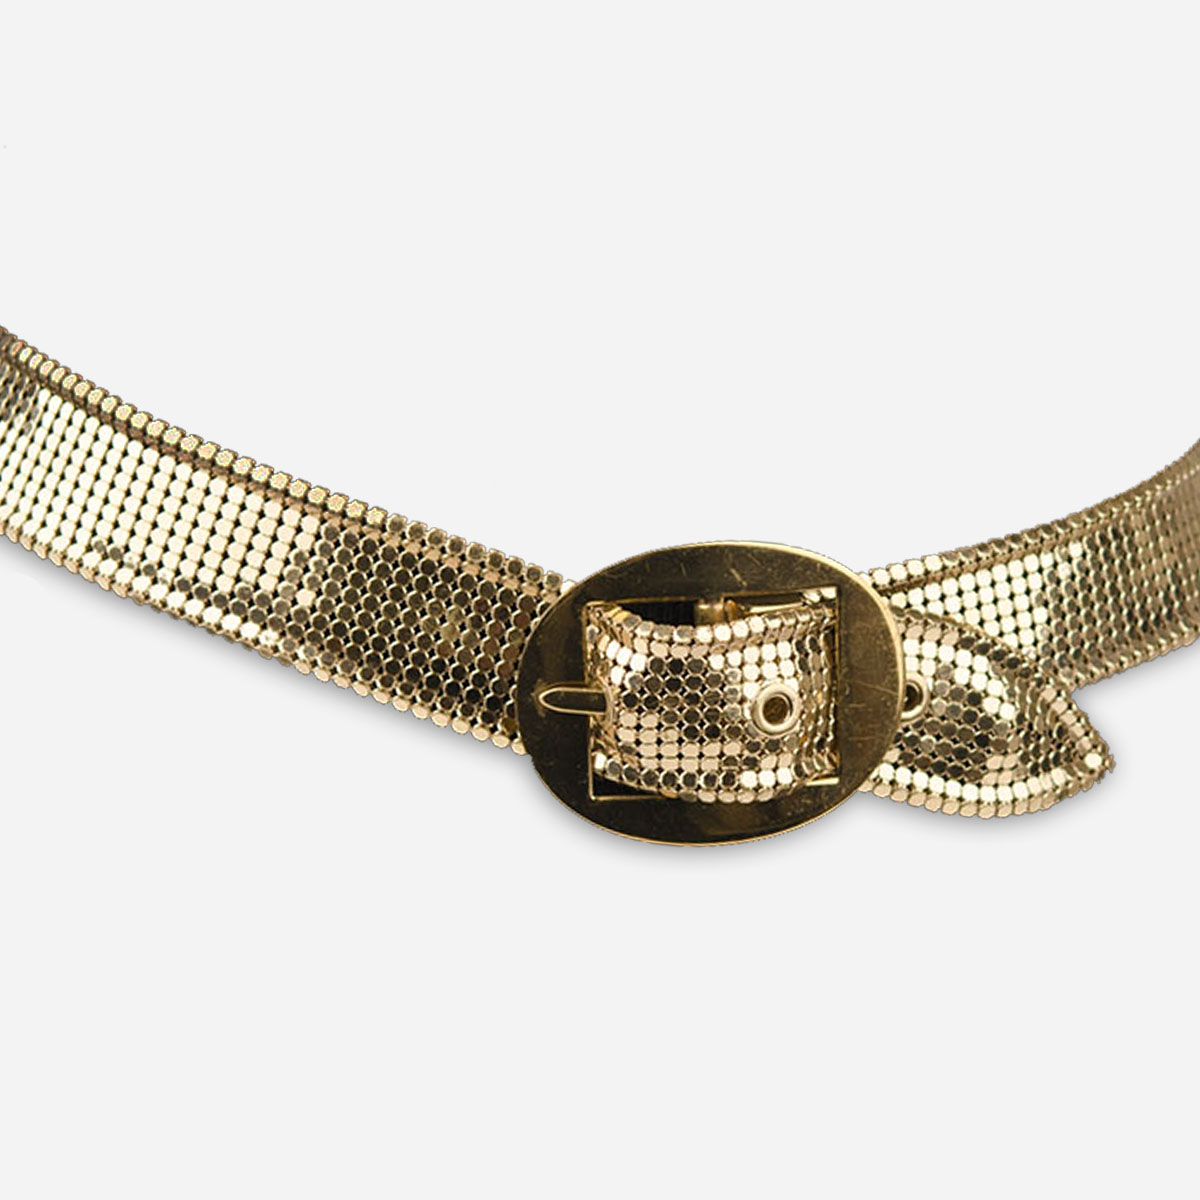 gold mesh sash belt with gold metal buckle